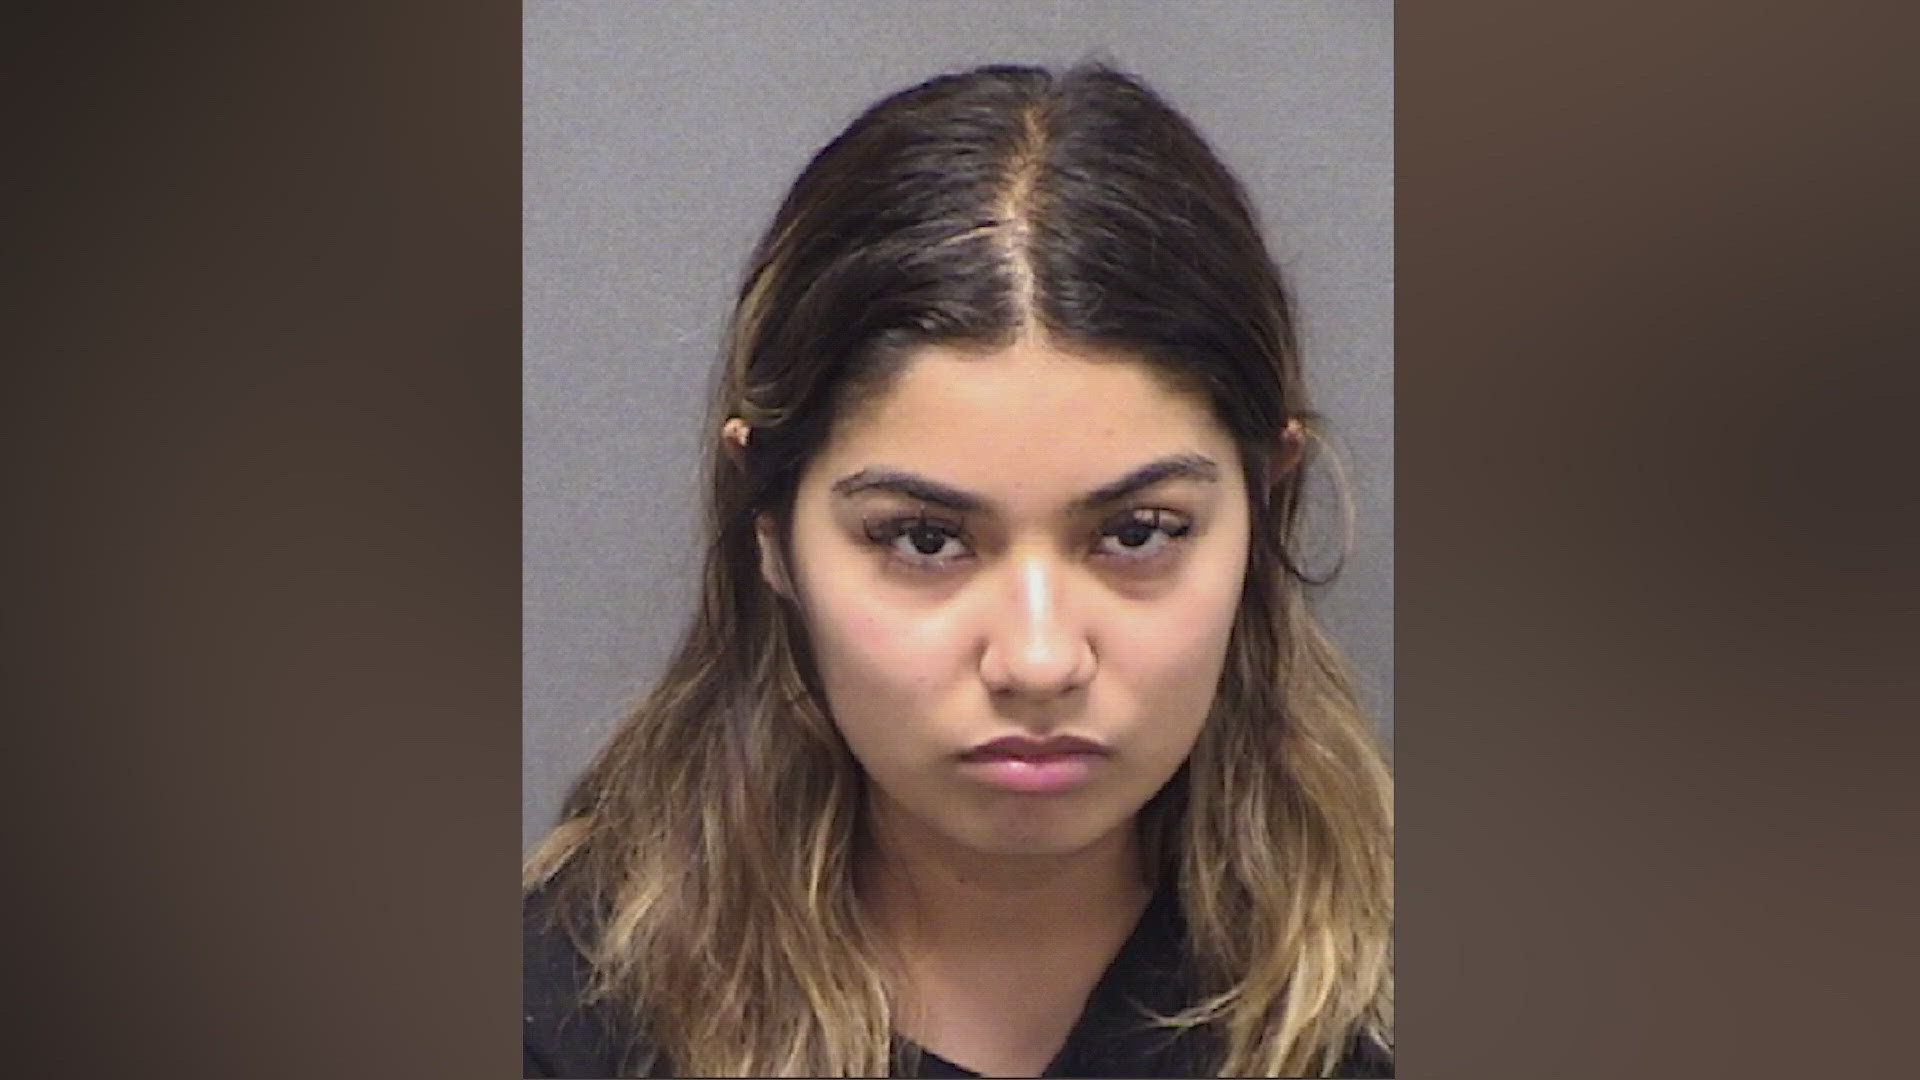 coworkers accused photos to disturbing employee threats, sending bomb of H-E-B